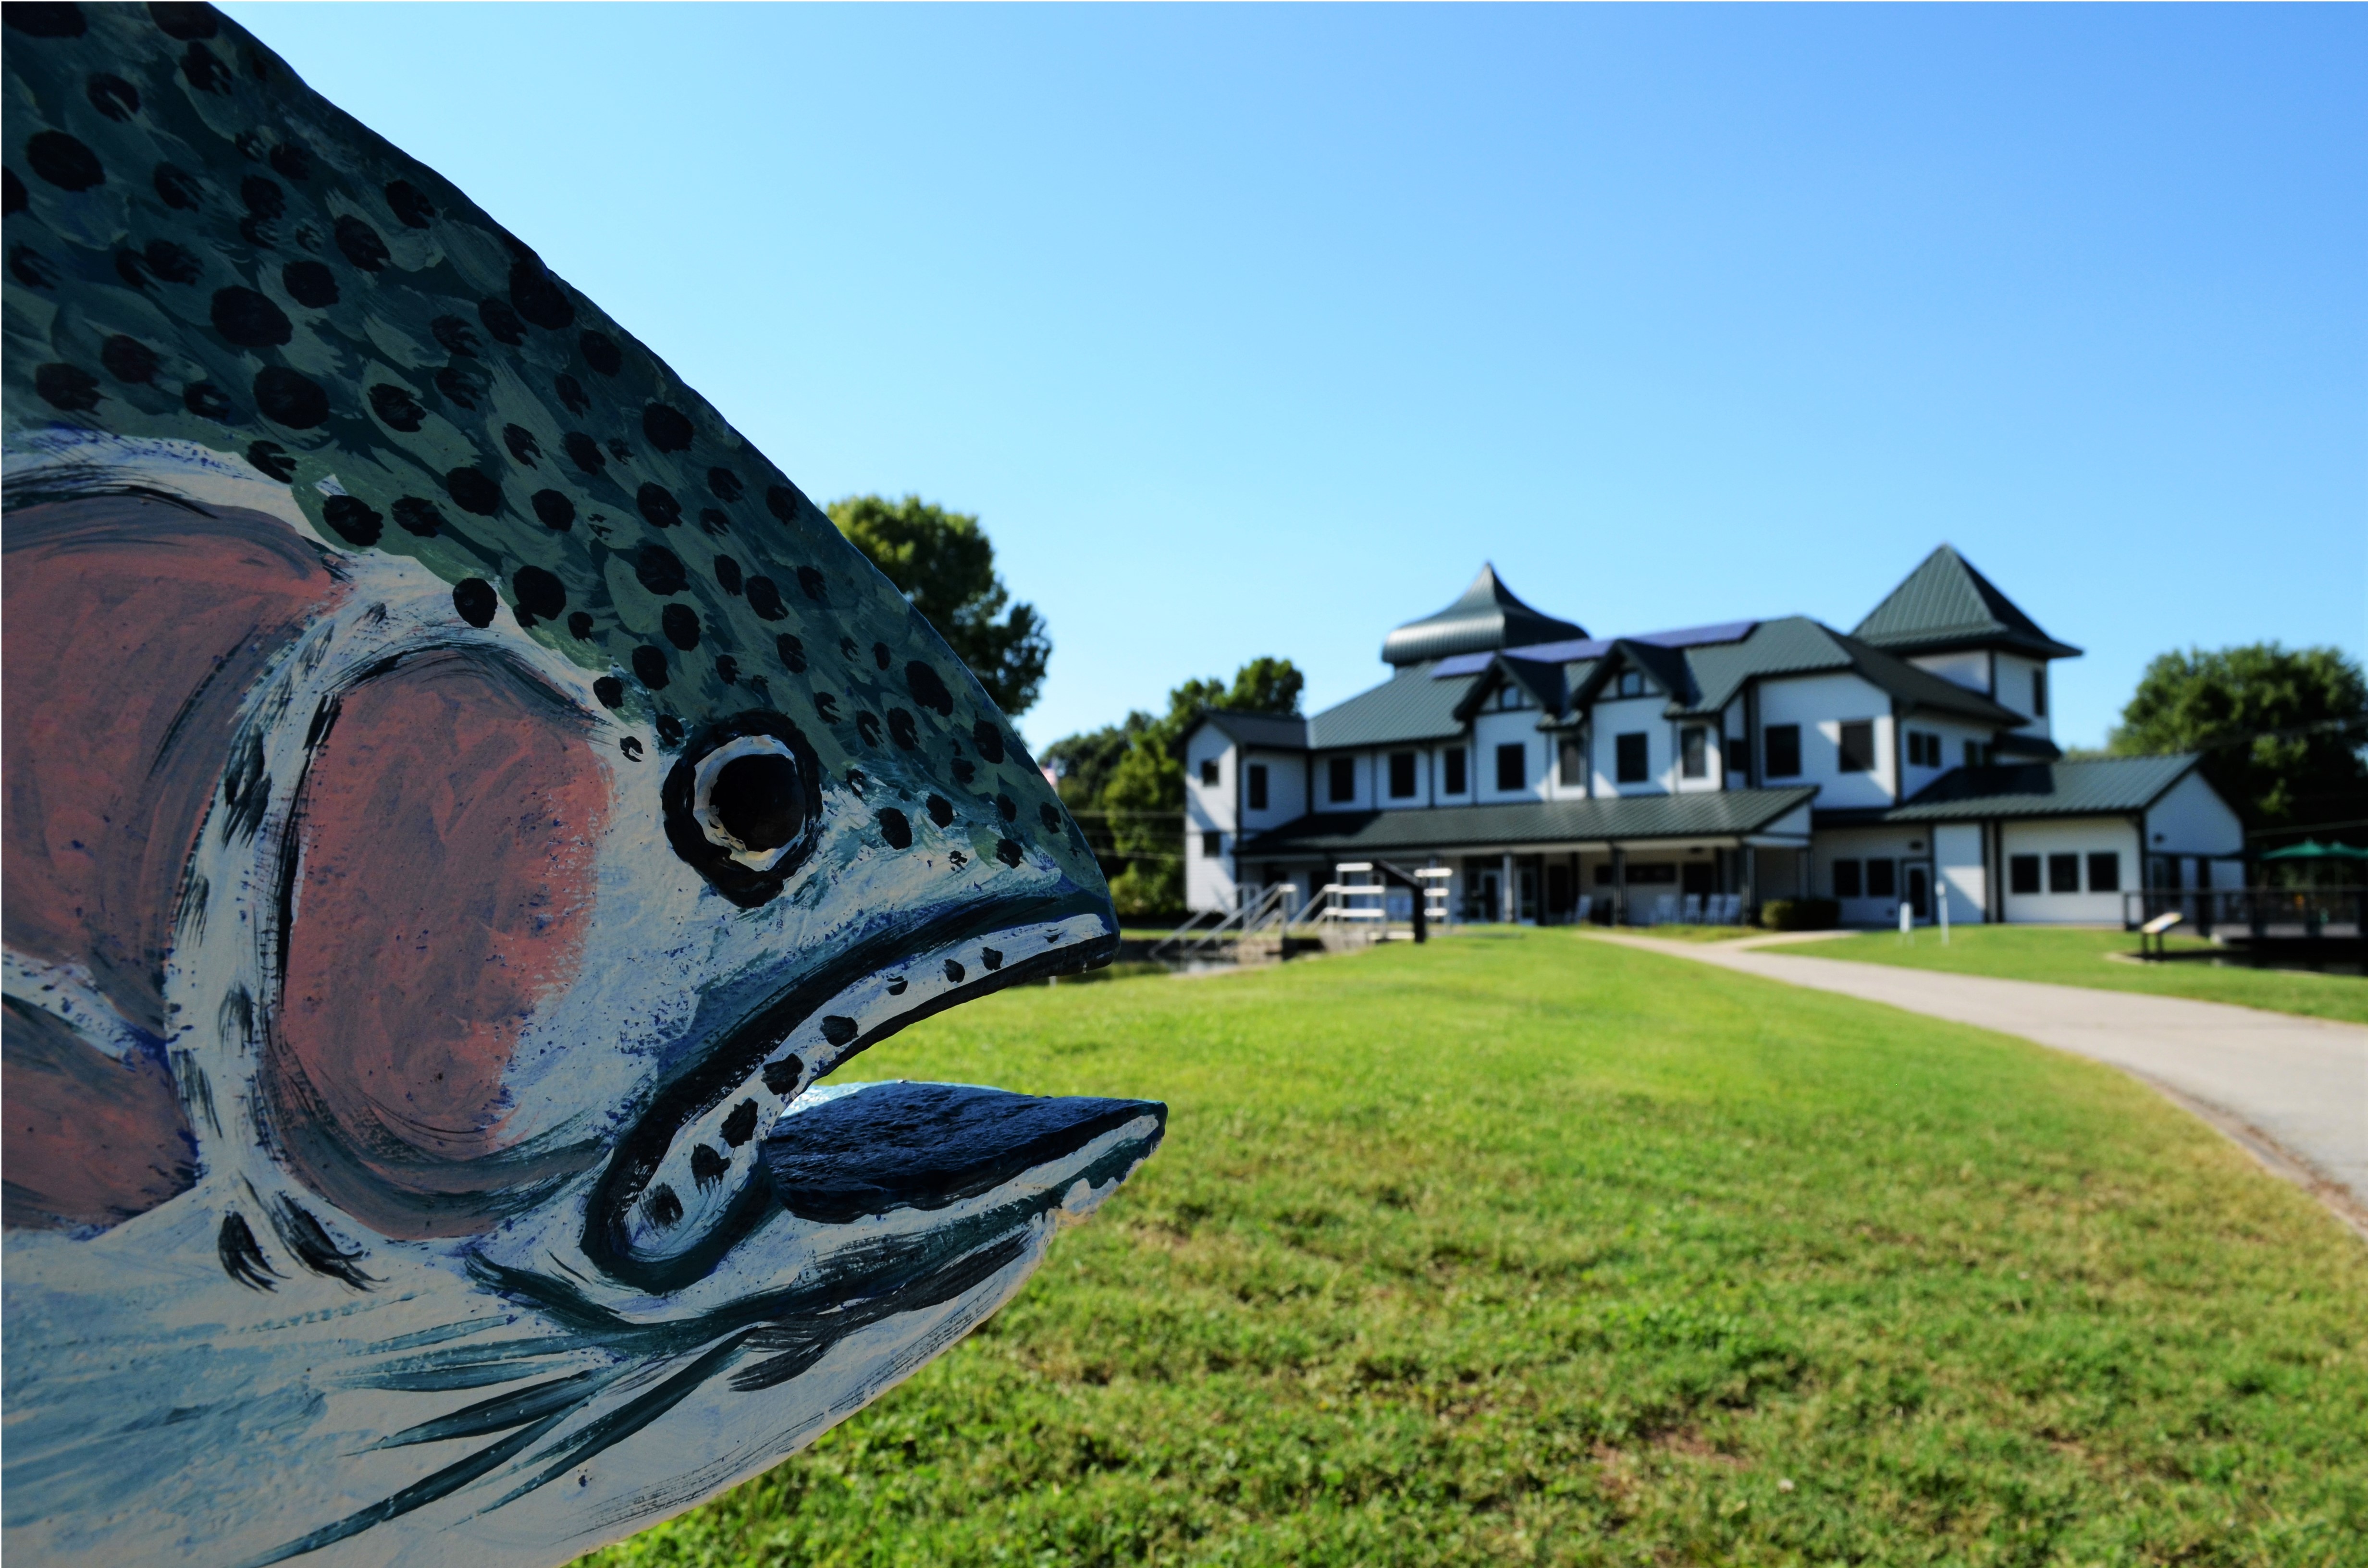 Painted rainbow trout sculpture in front of a historic white building with green rooftops.